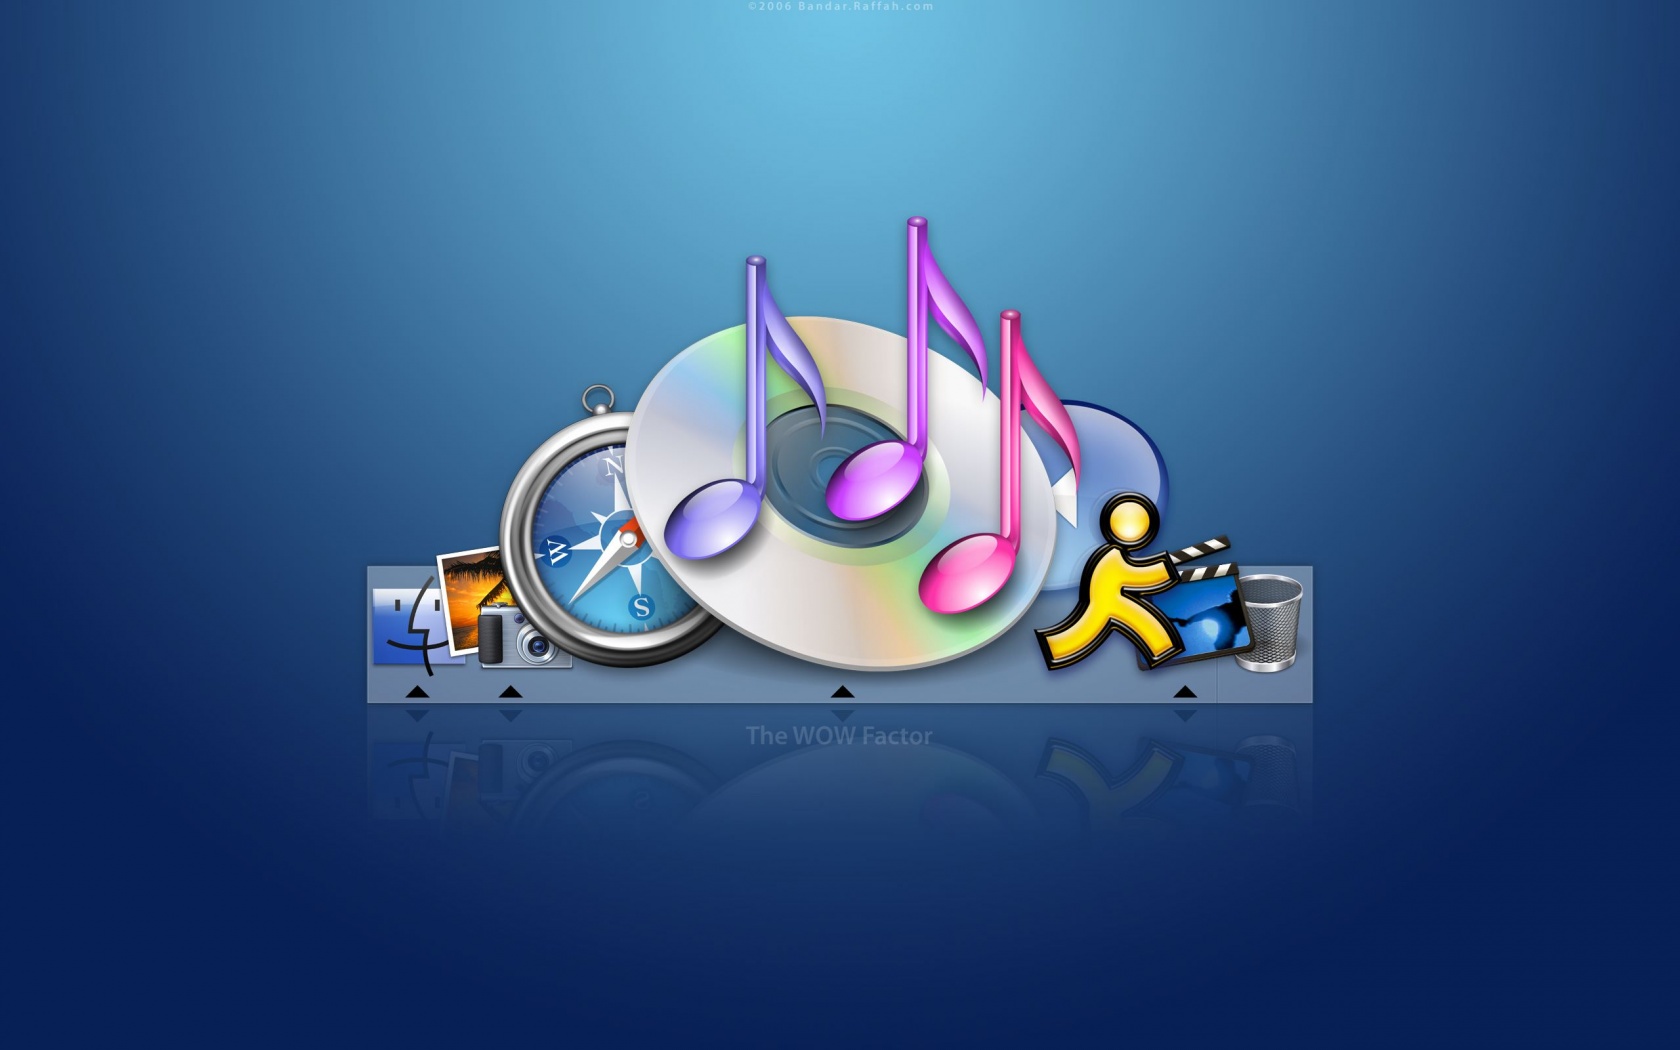 Apple Mac Itunes Hd Post In Pixel Of 1680 1050 All Dancing Disks And Tunes They Shall Add Liveliness To Your Device Tv Movies Post Free Wallpaper World